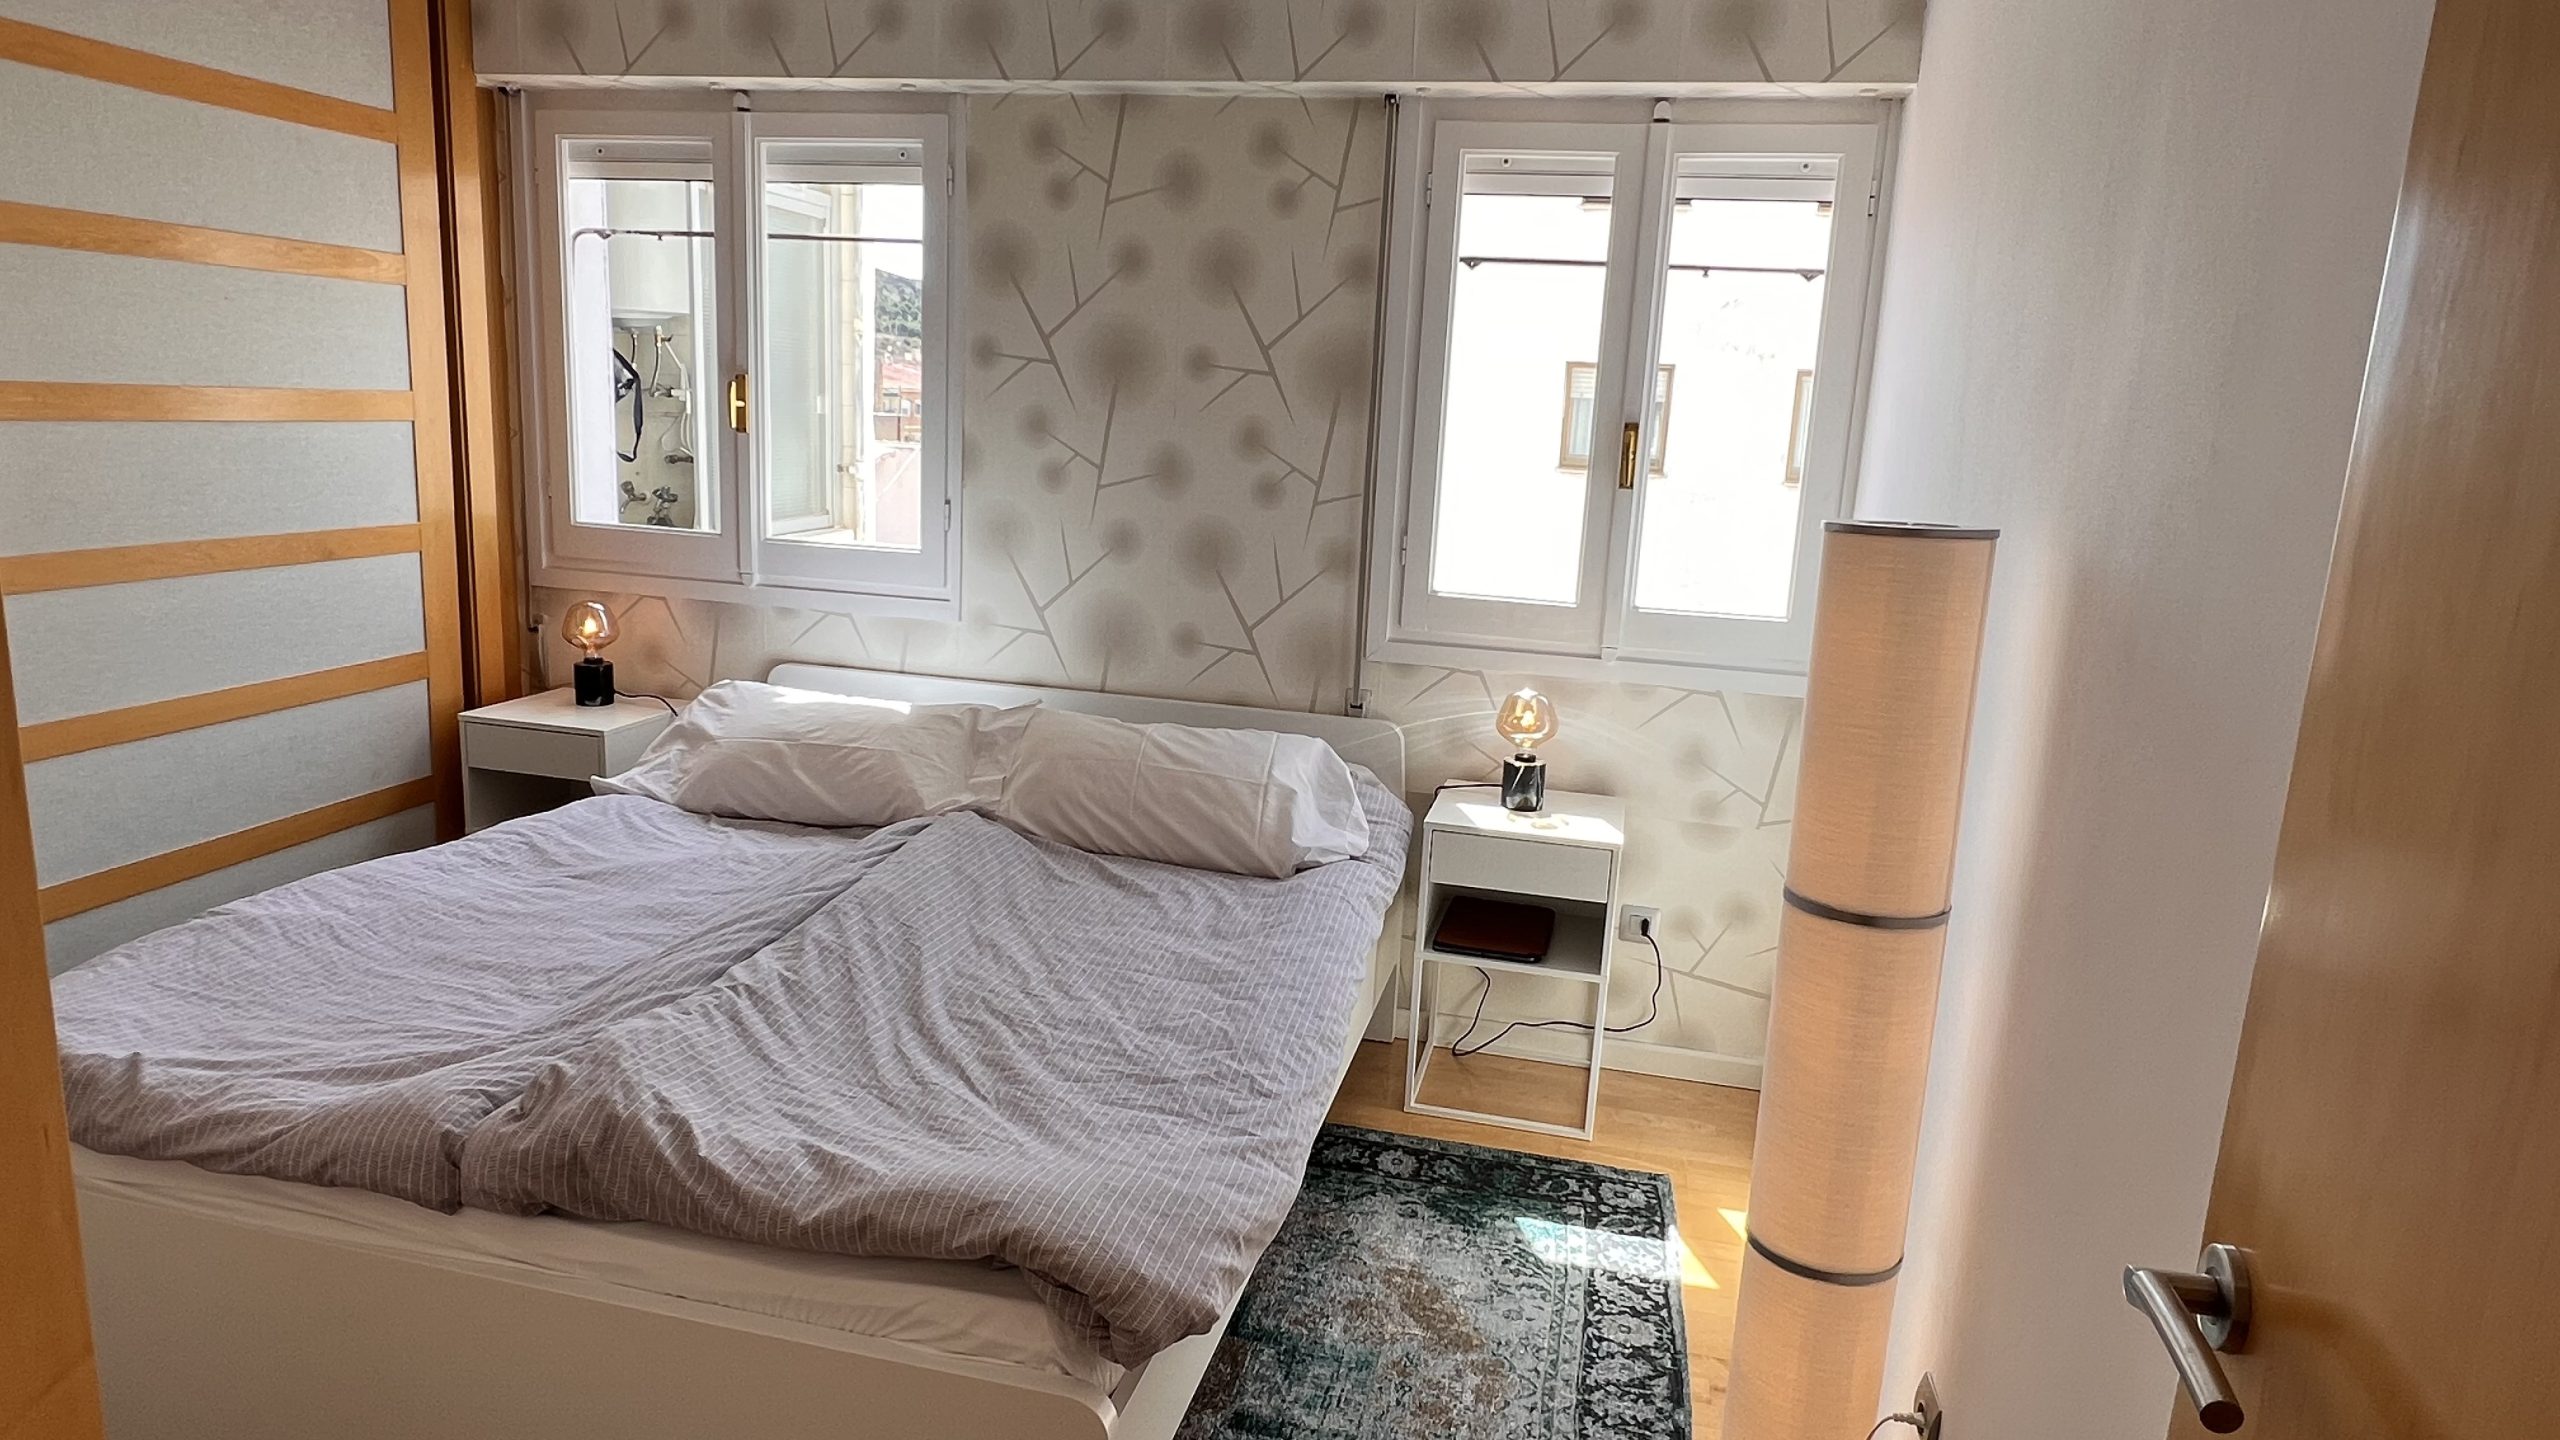 apartment for rent in Alicante - Bedroom